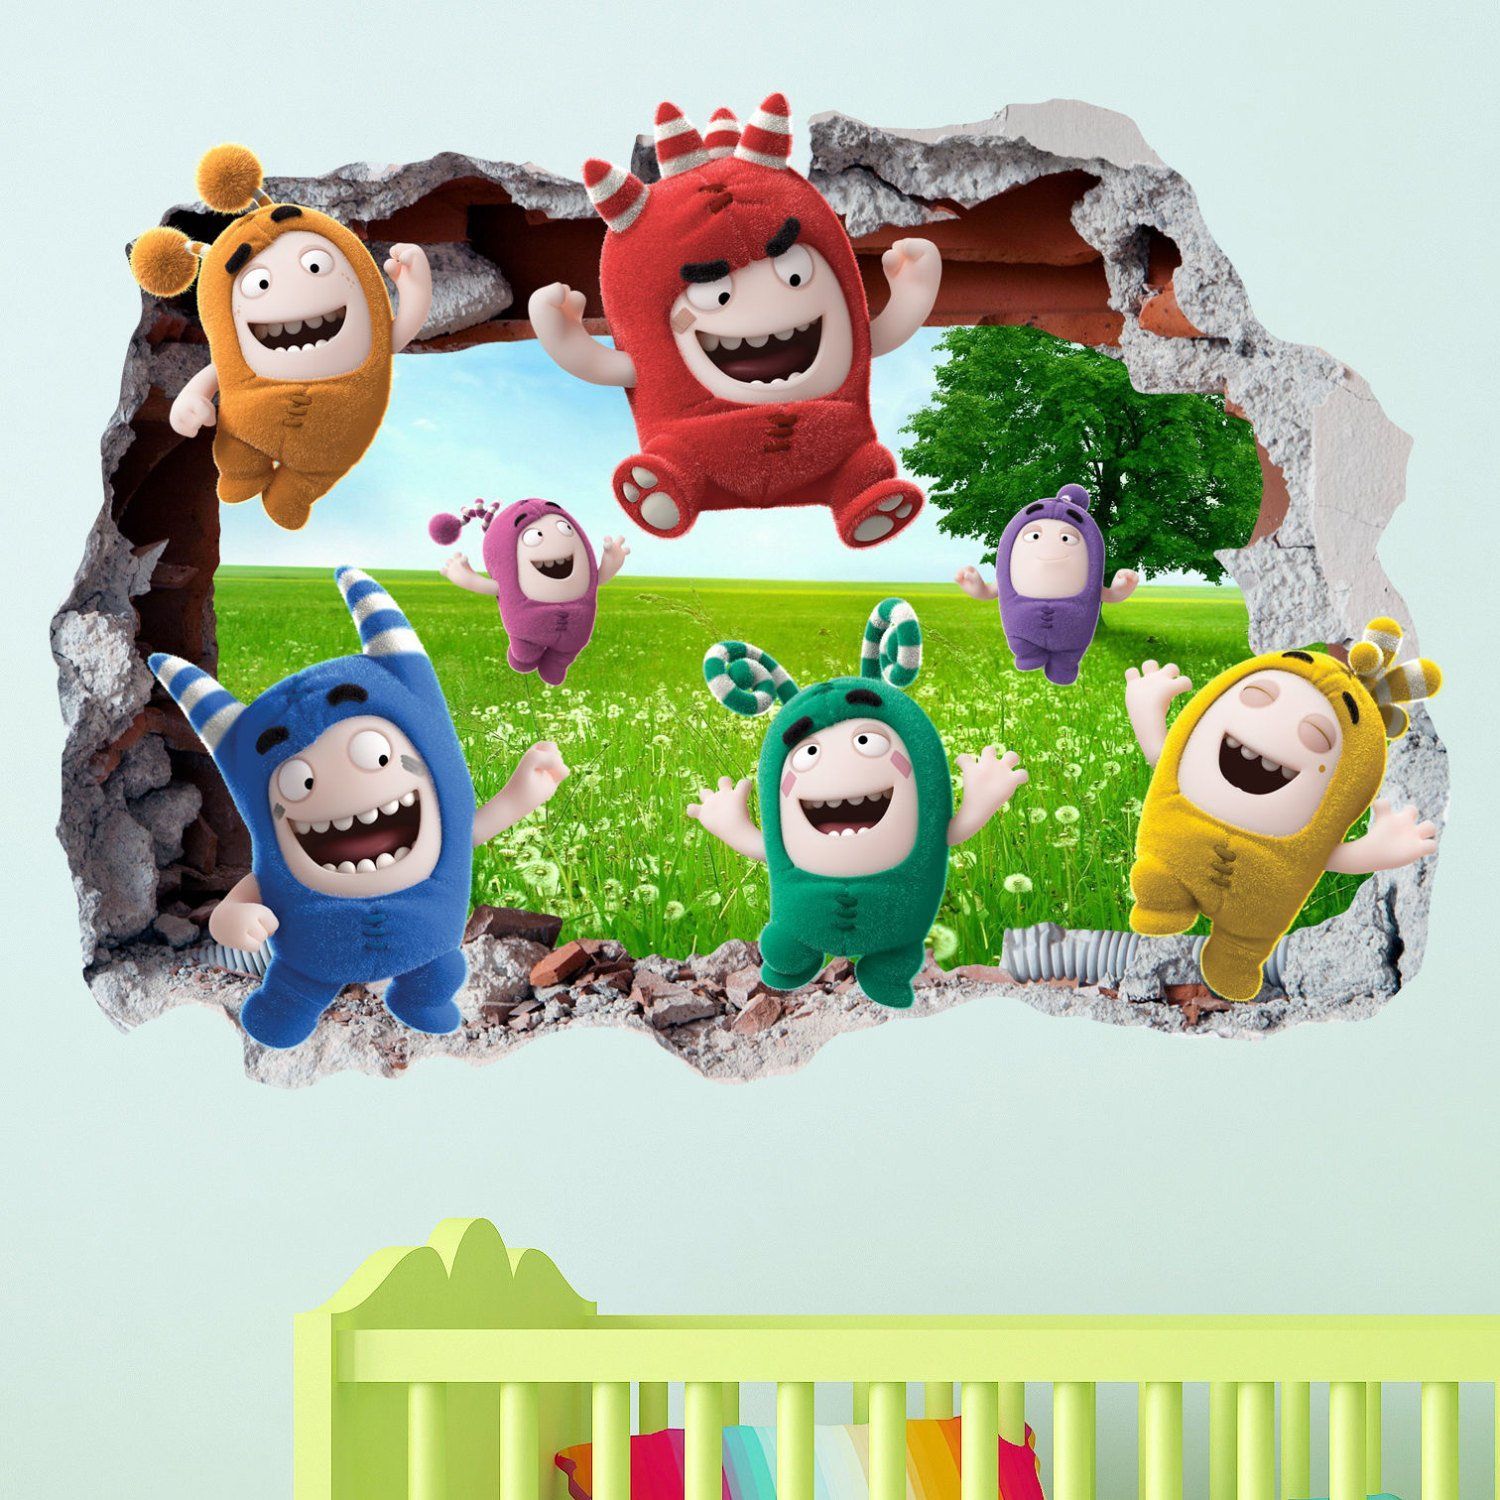 Signature Publishing Teams With One Animations Oddbods for ADVENTURES  WITH Monthly Magazine Issue  Licensing International